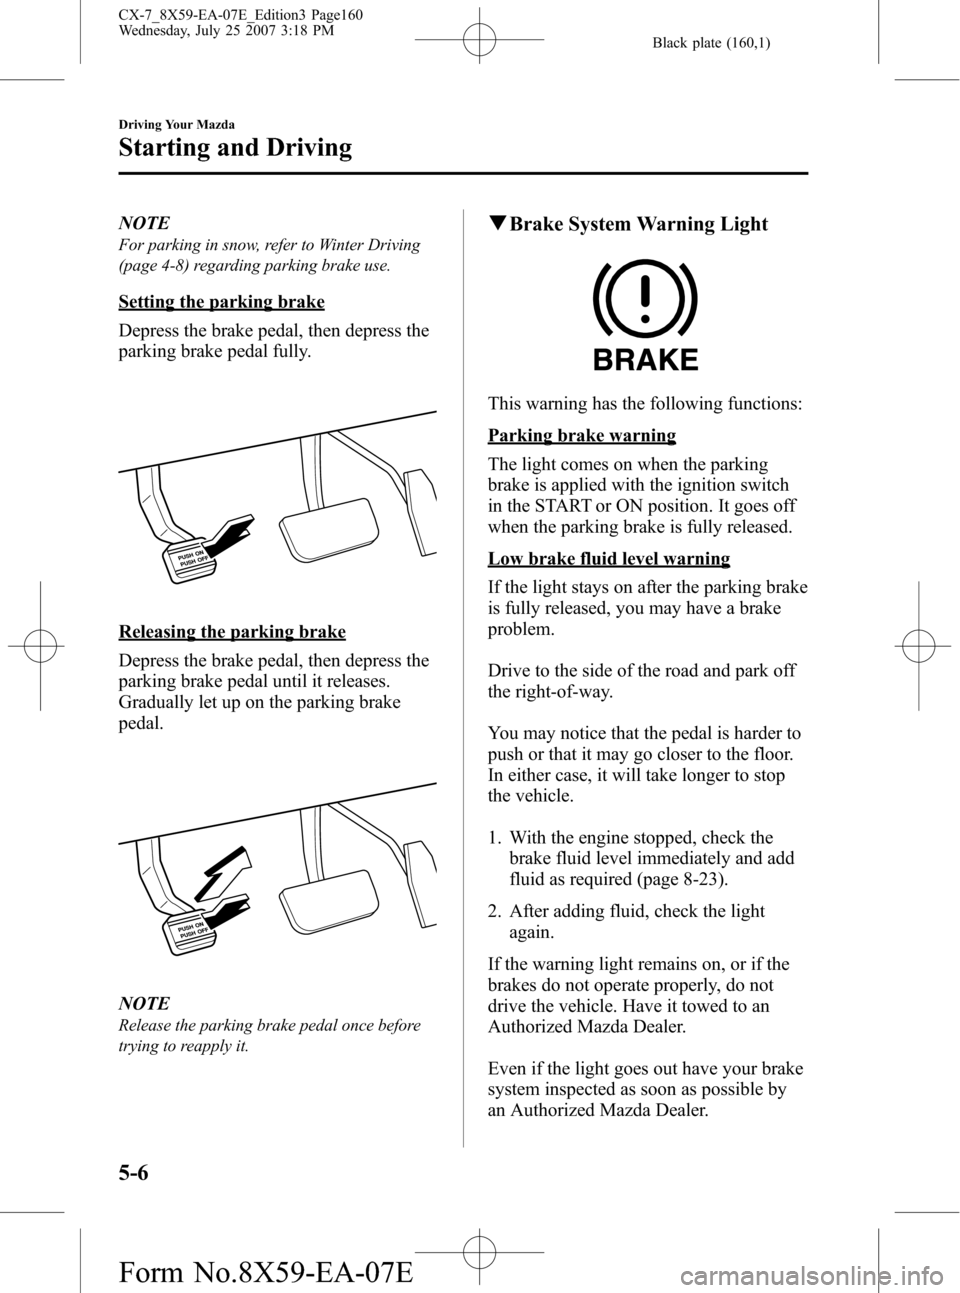 MAZDA MODEL CX-7 2008  Owners Manual (in English) Black plate (160,1)
NOTE
For parking in snow, refer to Winter Driving
(page 4-8) regarding parking brake use.
Setting the parking brake
Depress the brake pedal, then depress the
parking brake pedal fu